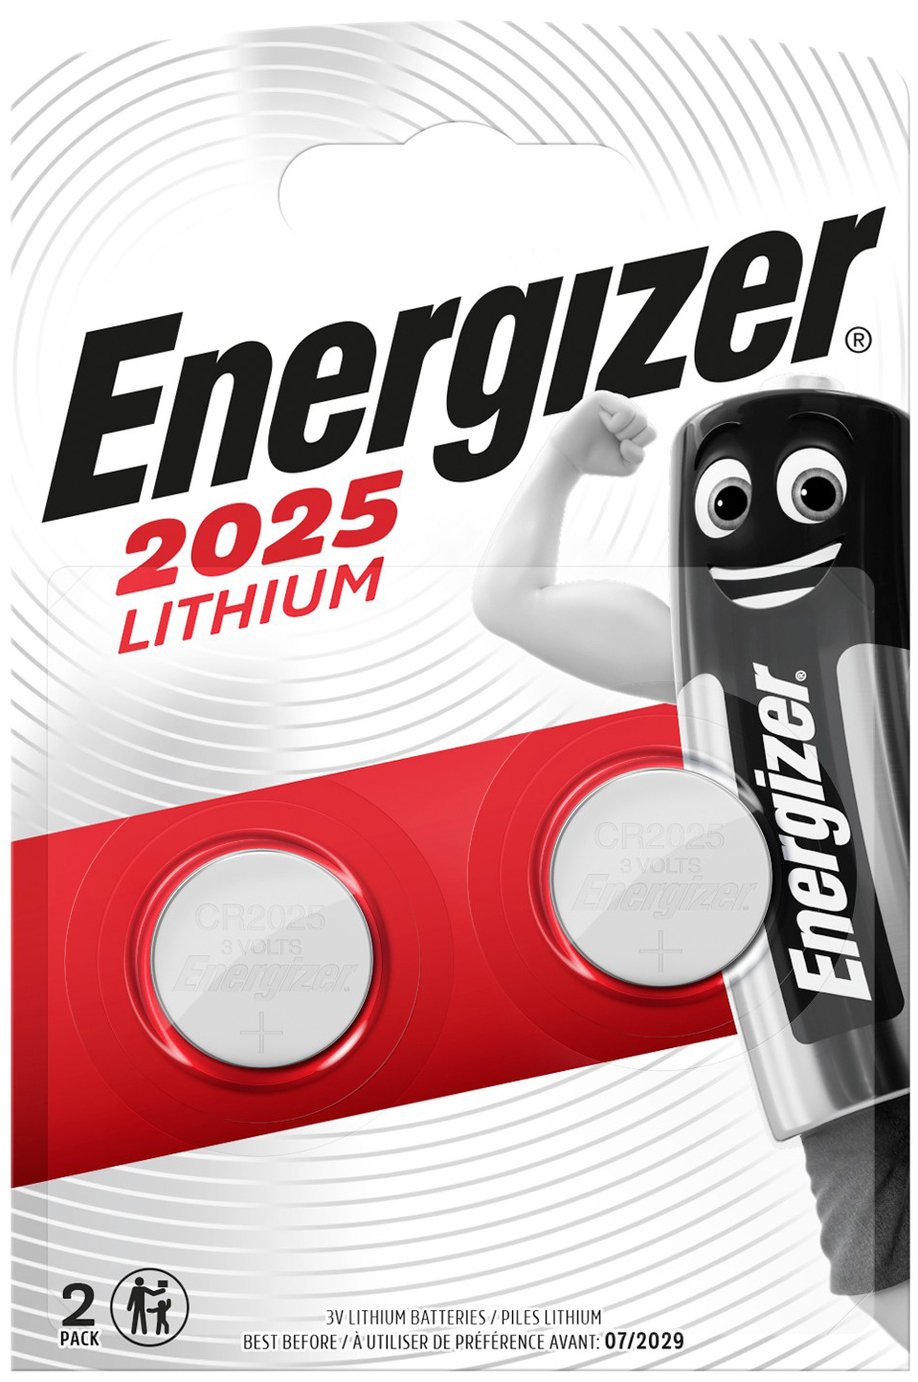 Energizer 2025 Lithium Coin Batteries - 2 Pack